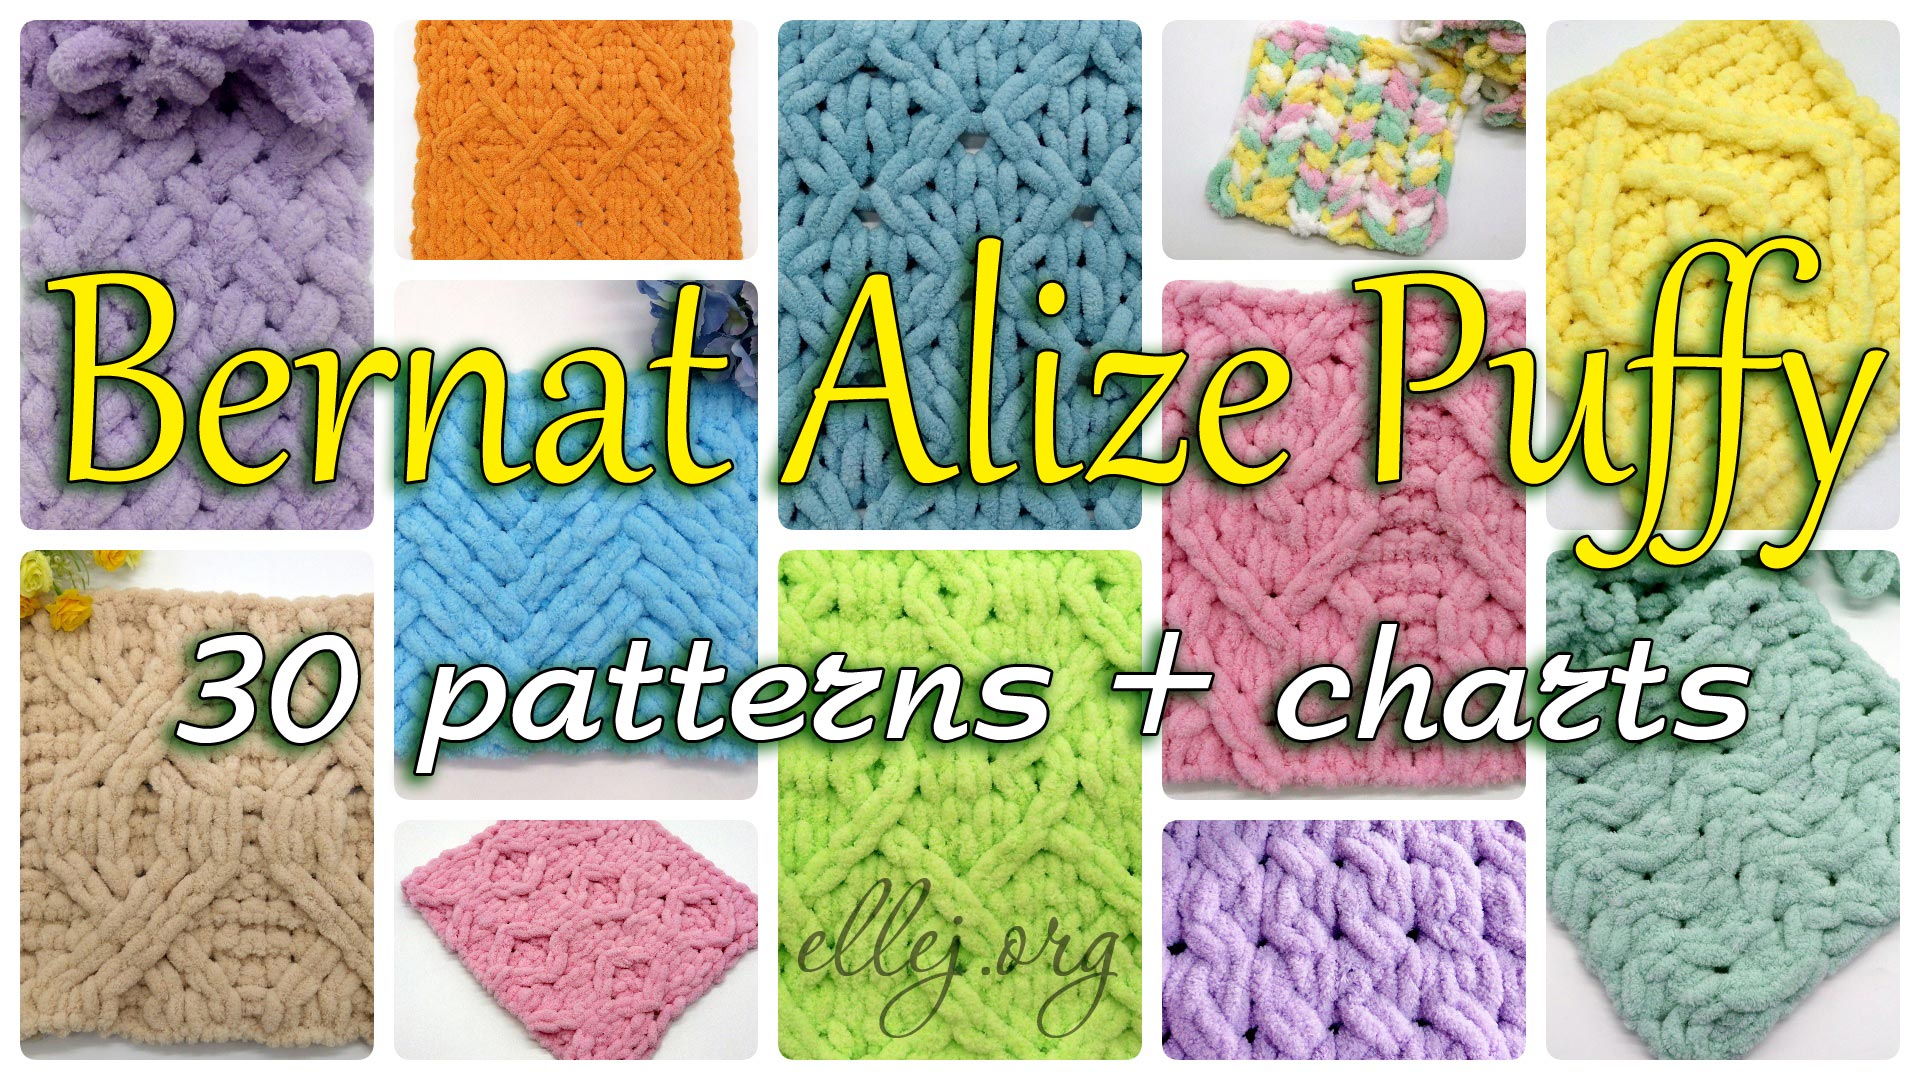 30 patterns for Bernat Alize Puffy. Diagrams for creating blankets (Part 1)